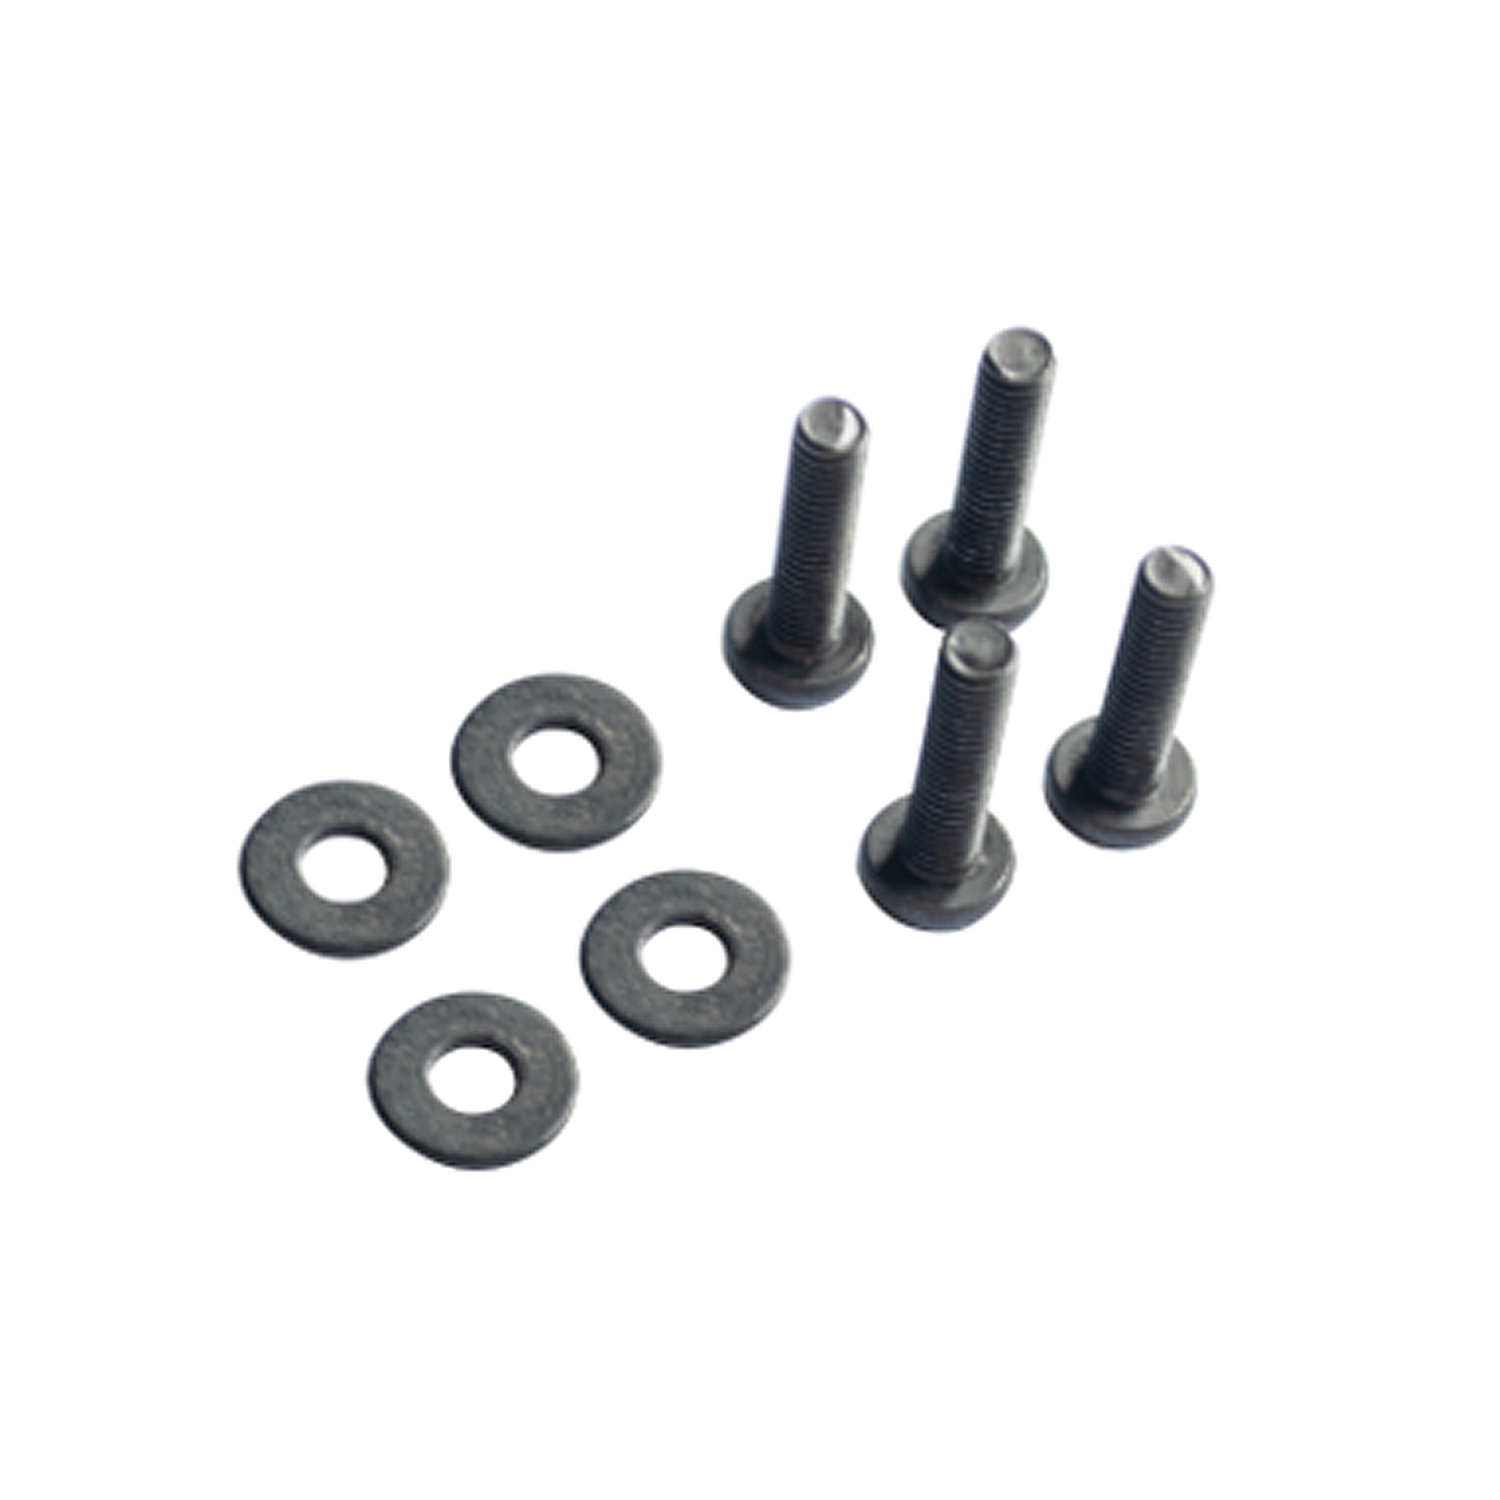 For TG-BC3H1065 (Honda Ridgeline) Only - Screws and Washers Set | 4 Sets | SP-BC3041